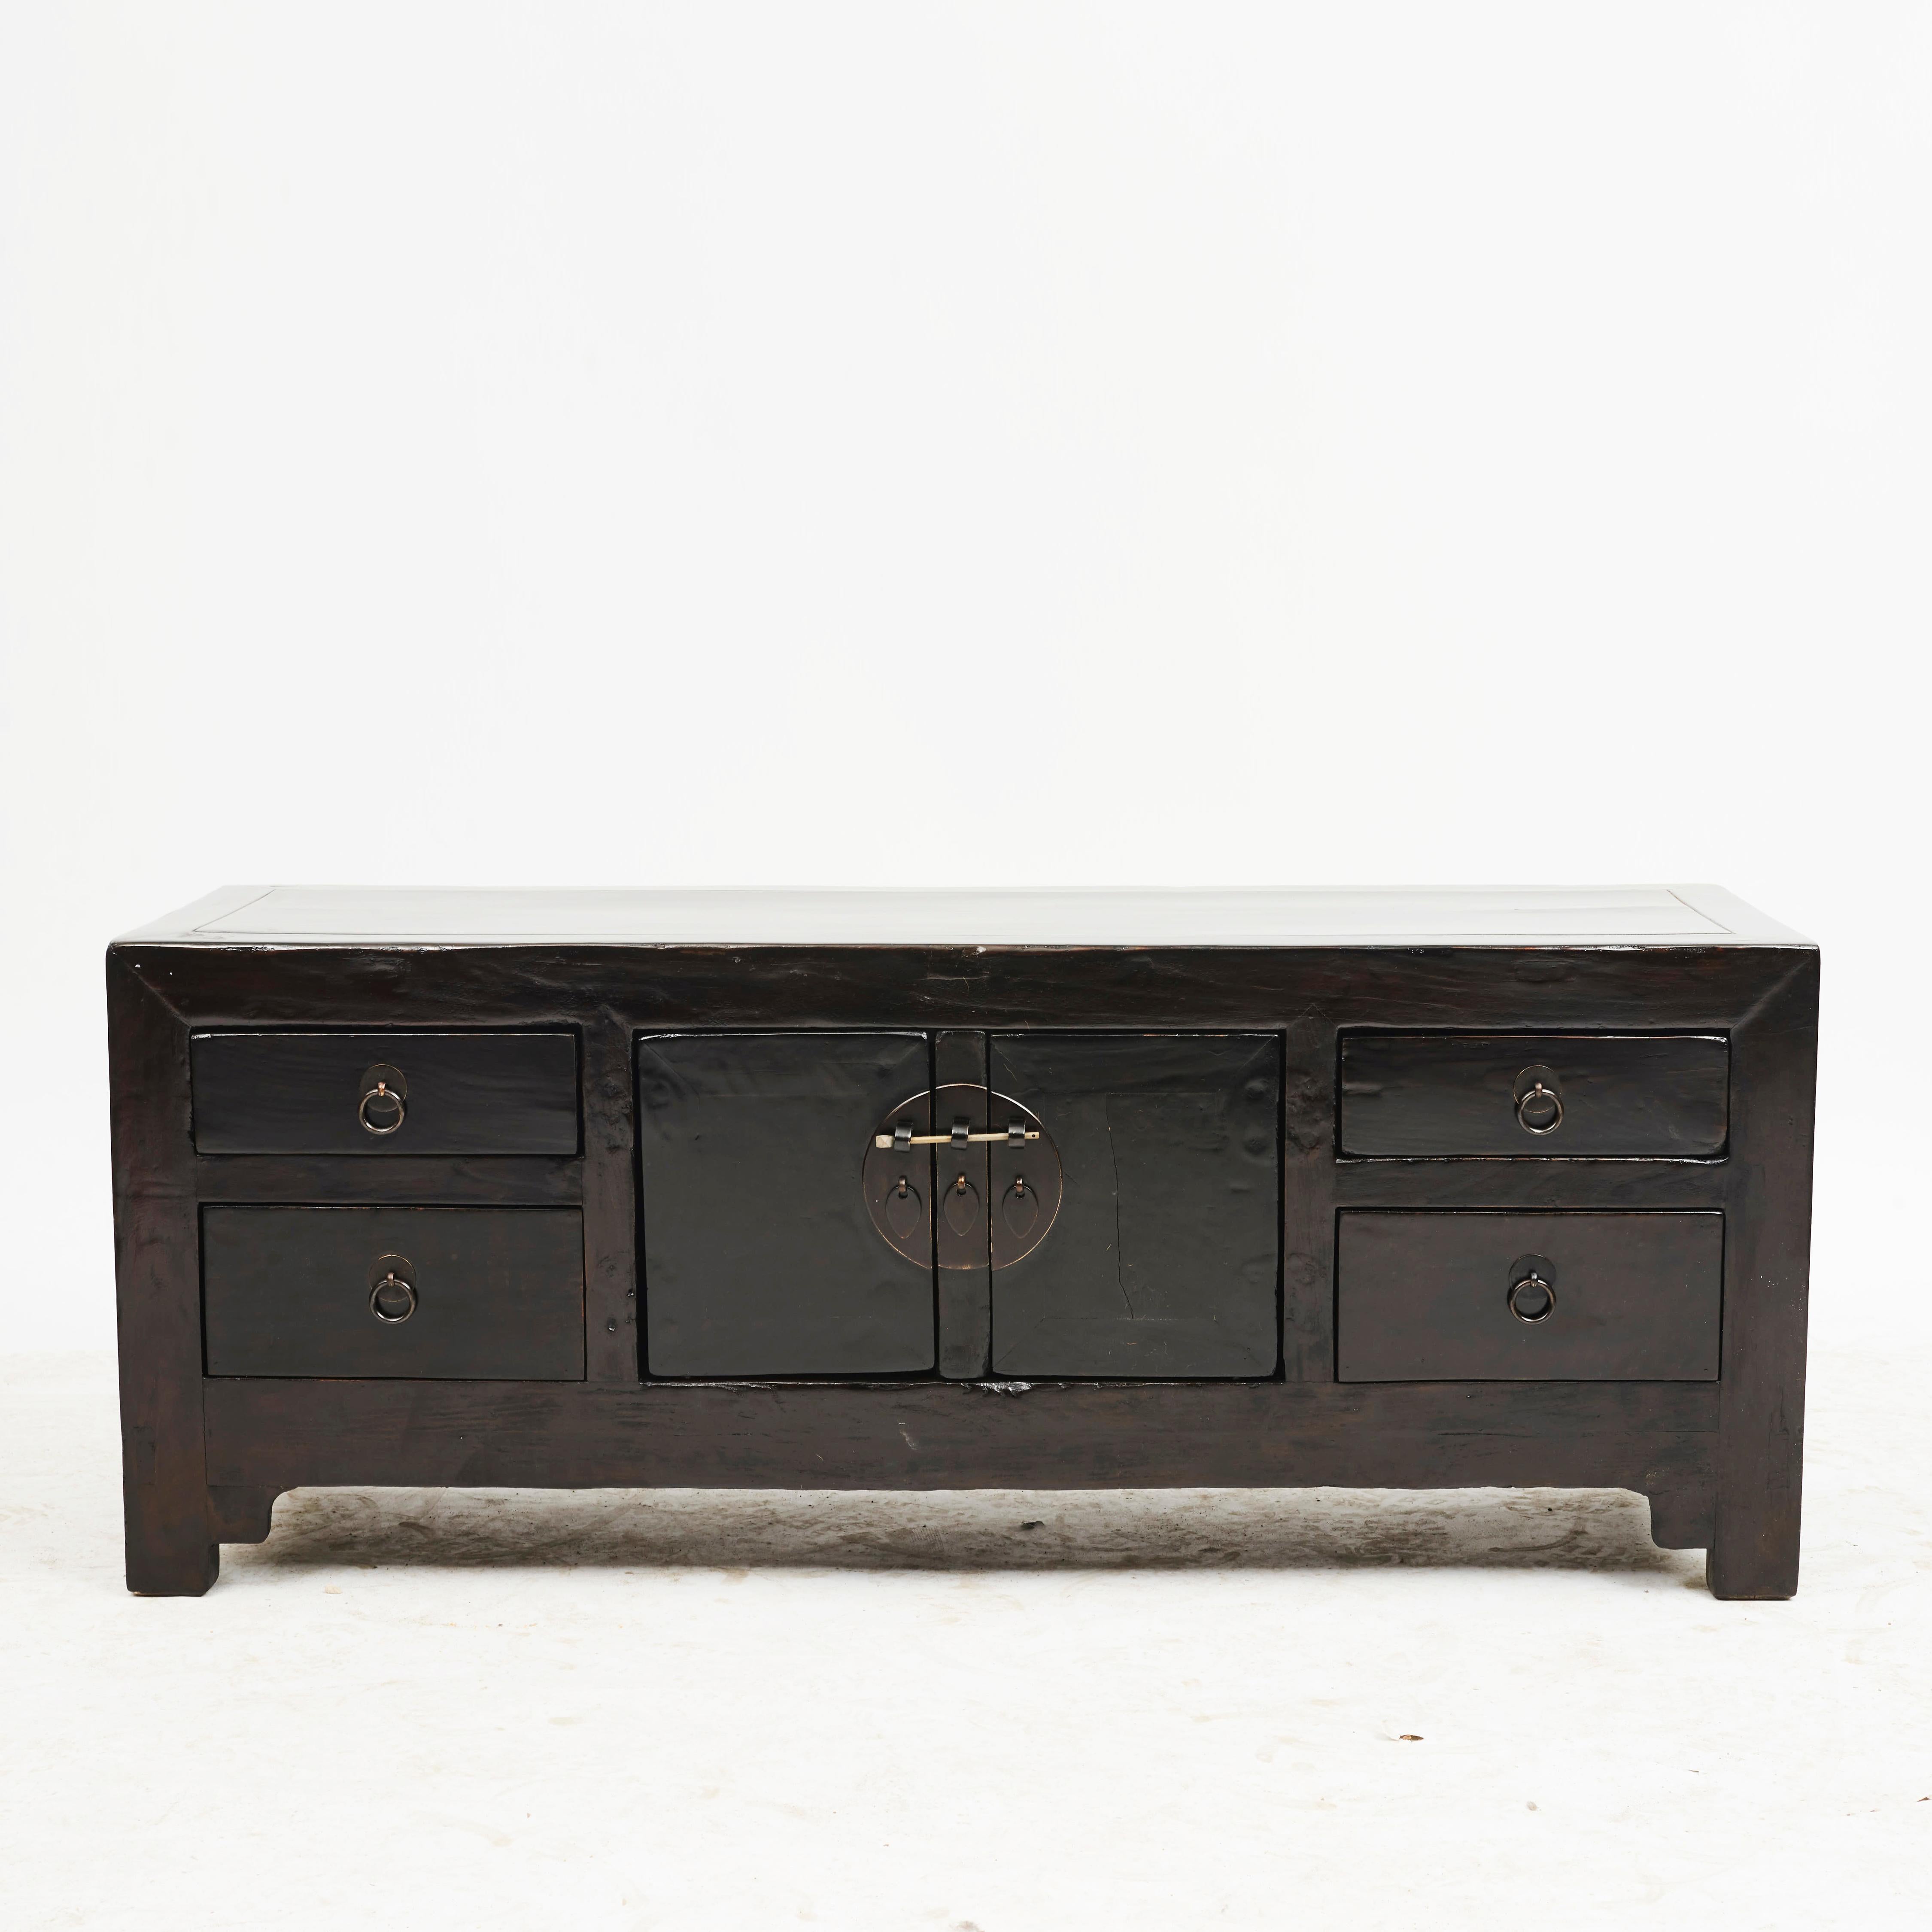 Chinese antique Art Deco style 'Kang-table' (low console table). Black lacquer.
Double-door flanked by two drawers on each side. Each drawer is adorned with brass ring pulls with circular back plates.
Shandong, China, 1910-1915.
Freestanding. Can